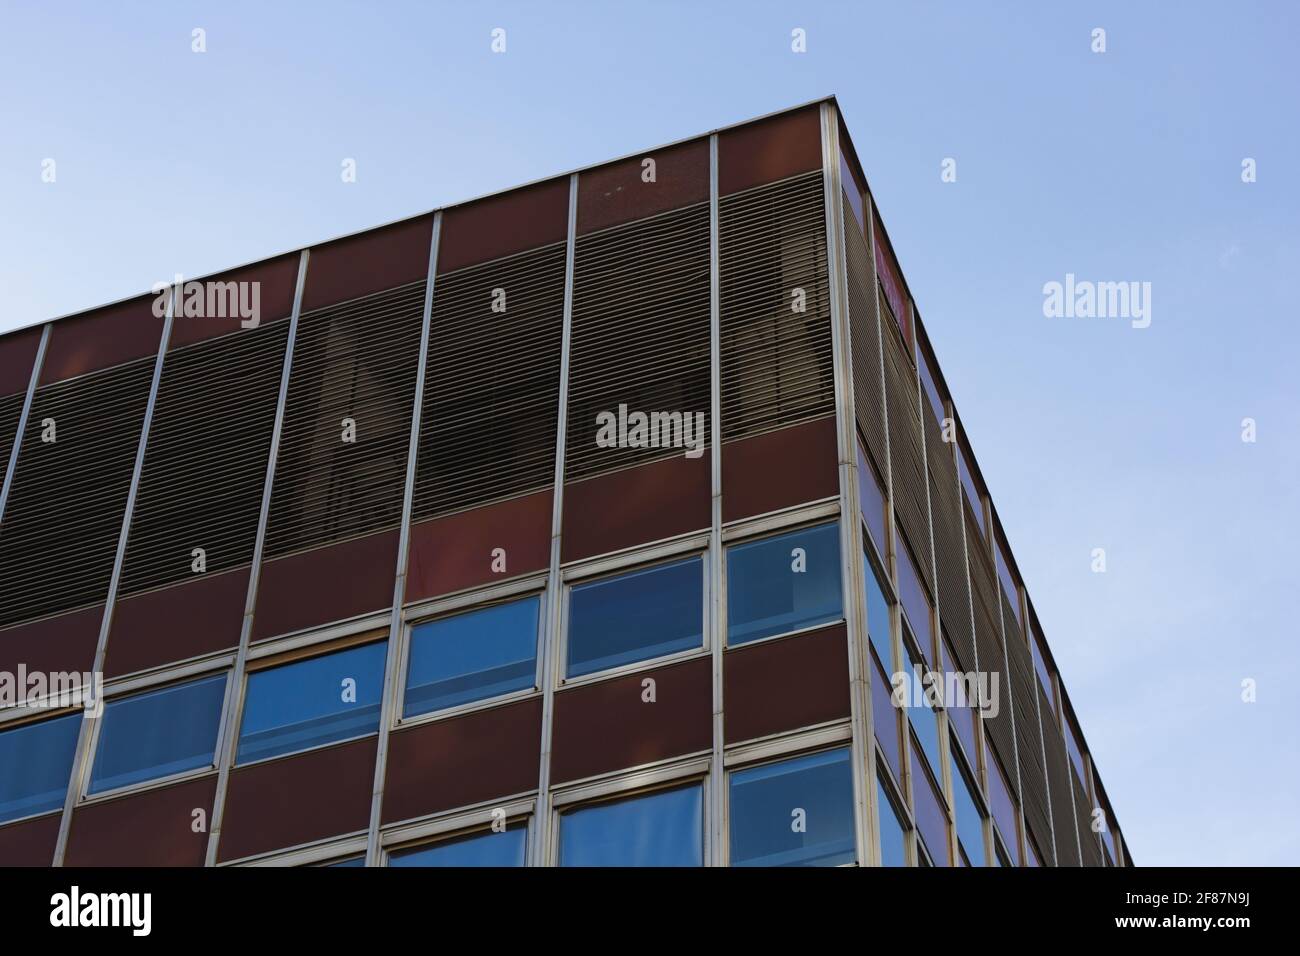 Red and blue facade of a modern building Stock Photo